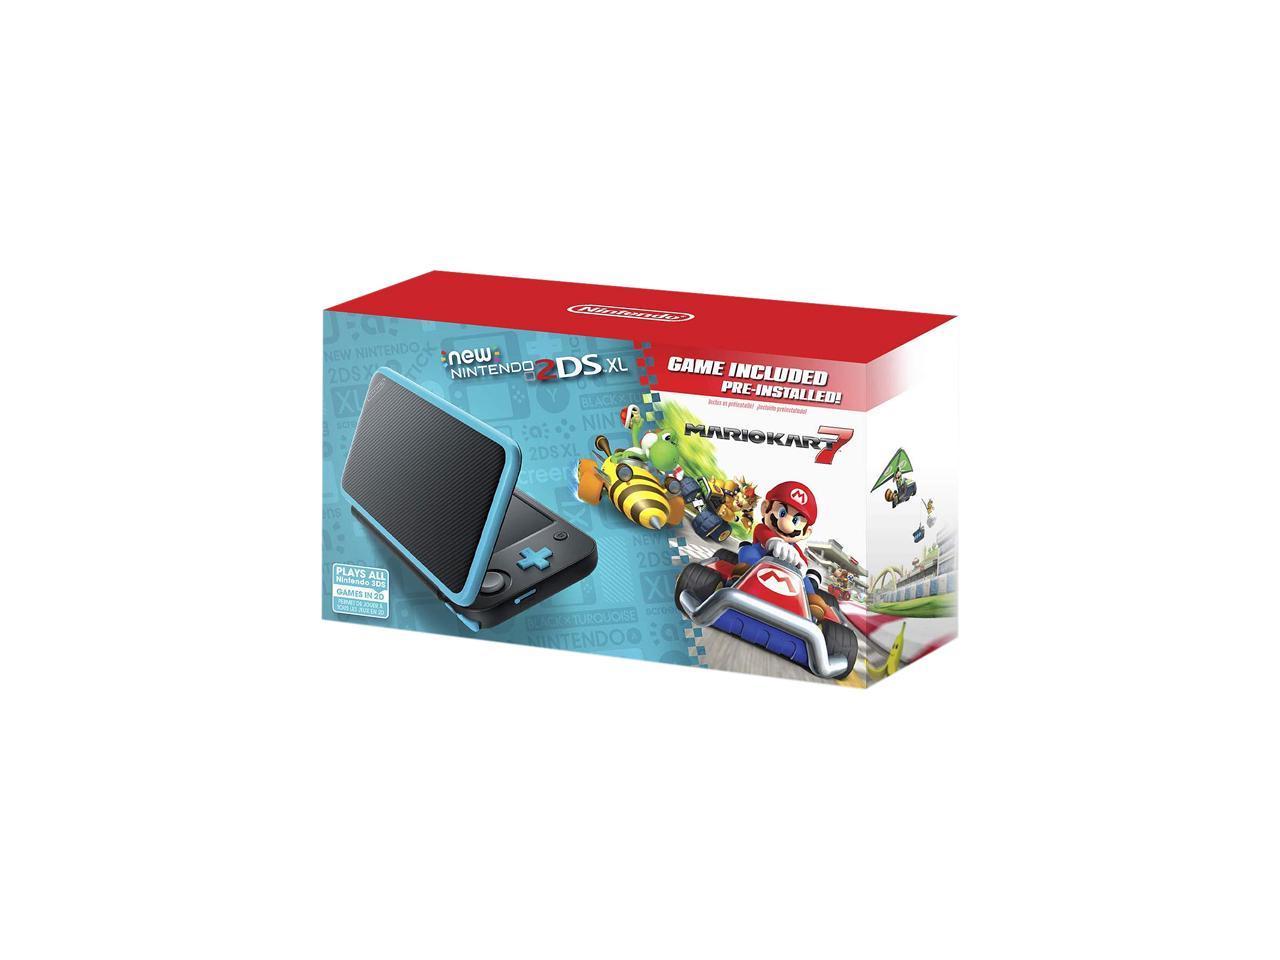 New Nintendo 2ds Xl Black Turquoise With Mario Kart 7